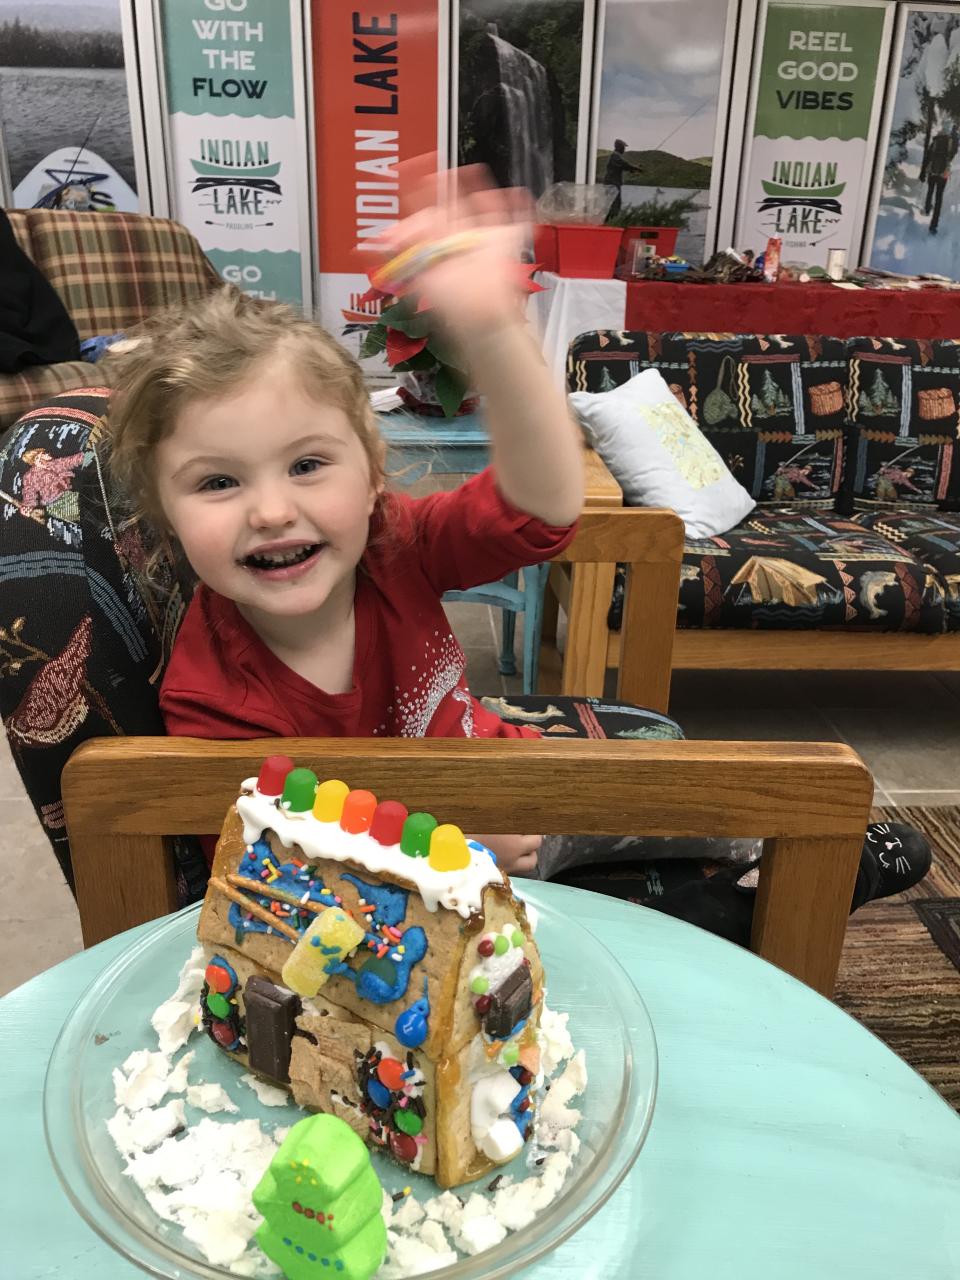 Child with gingerbread house